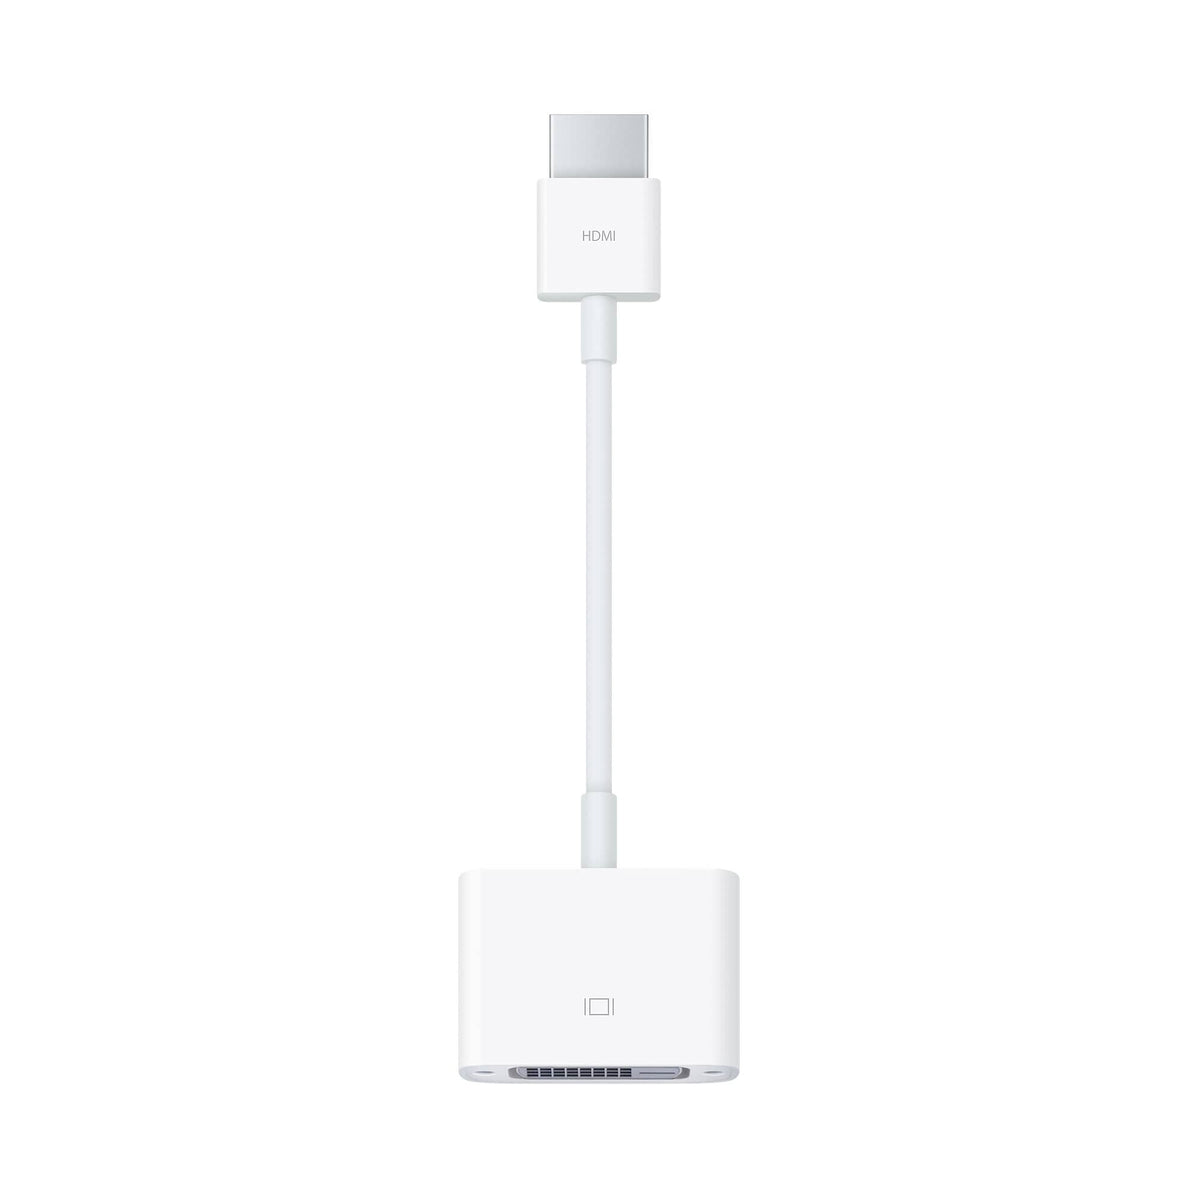 Apple HDMI To DVI Adapter